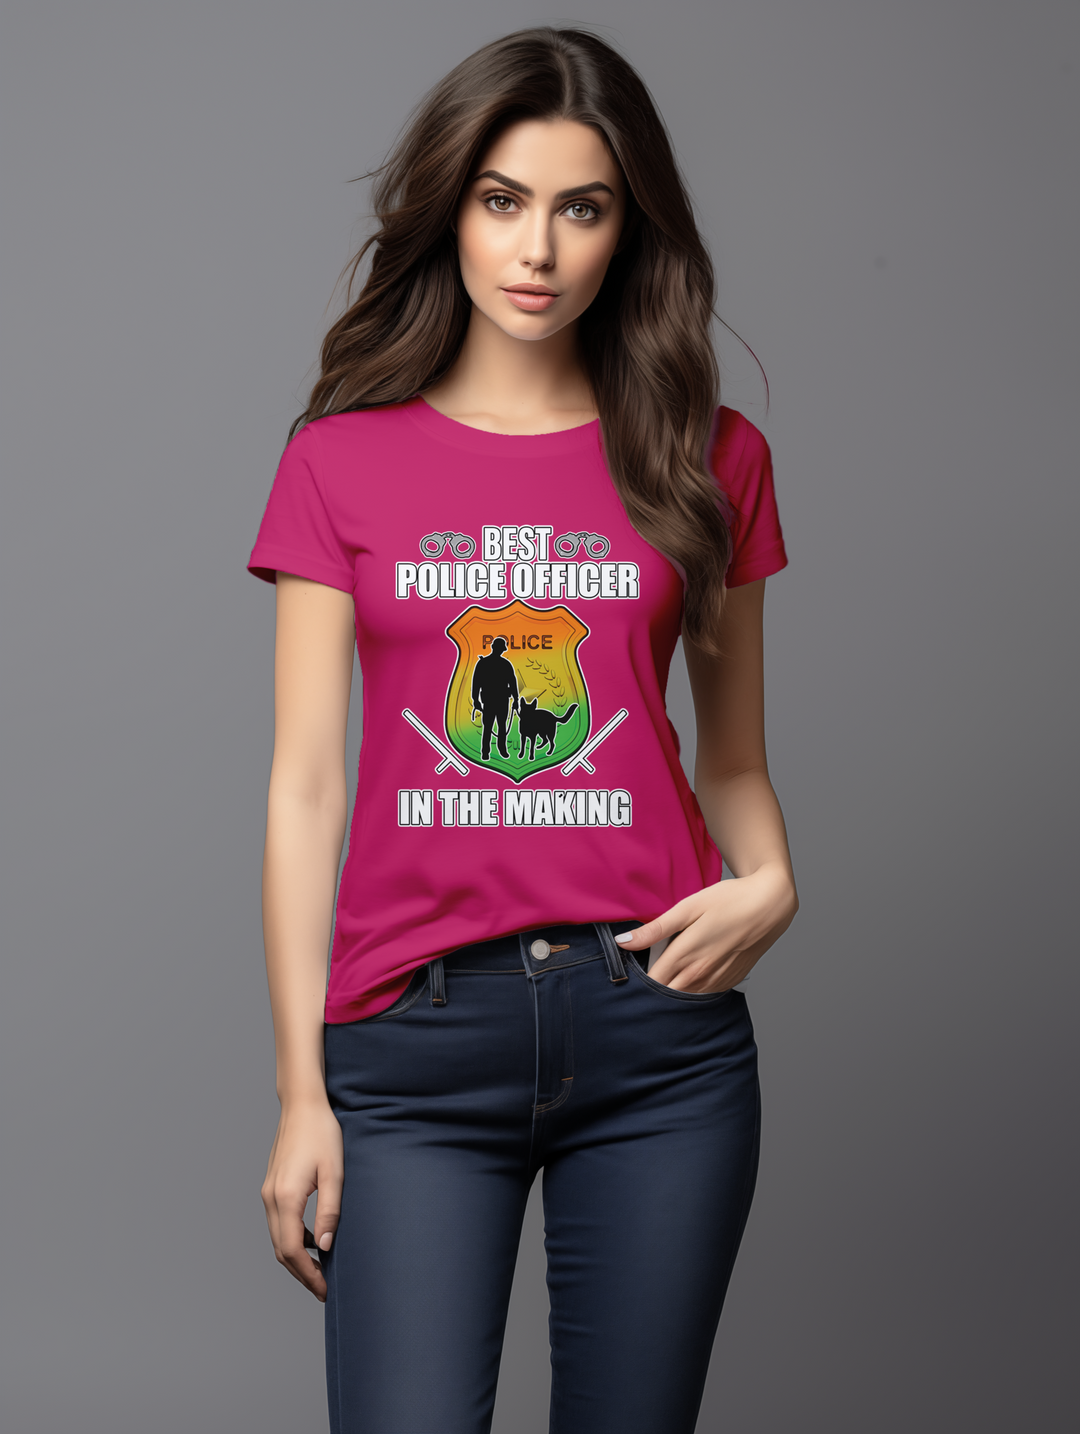 Womens Pink Best Police Officer tee